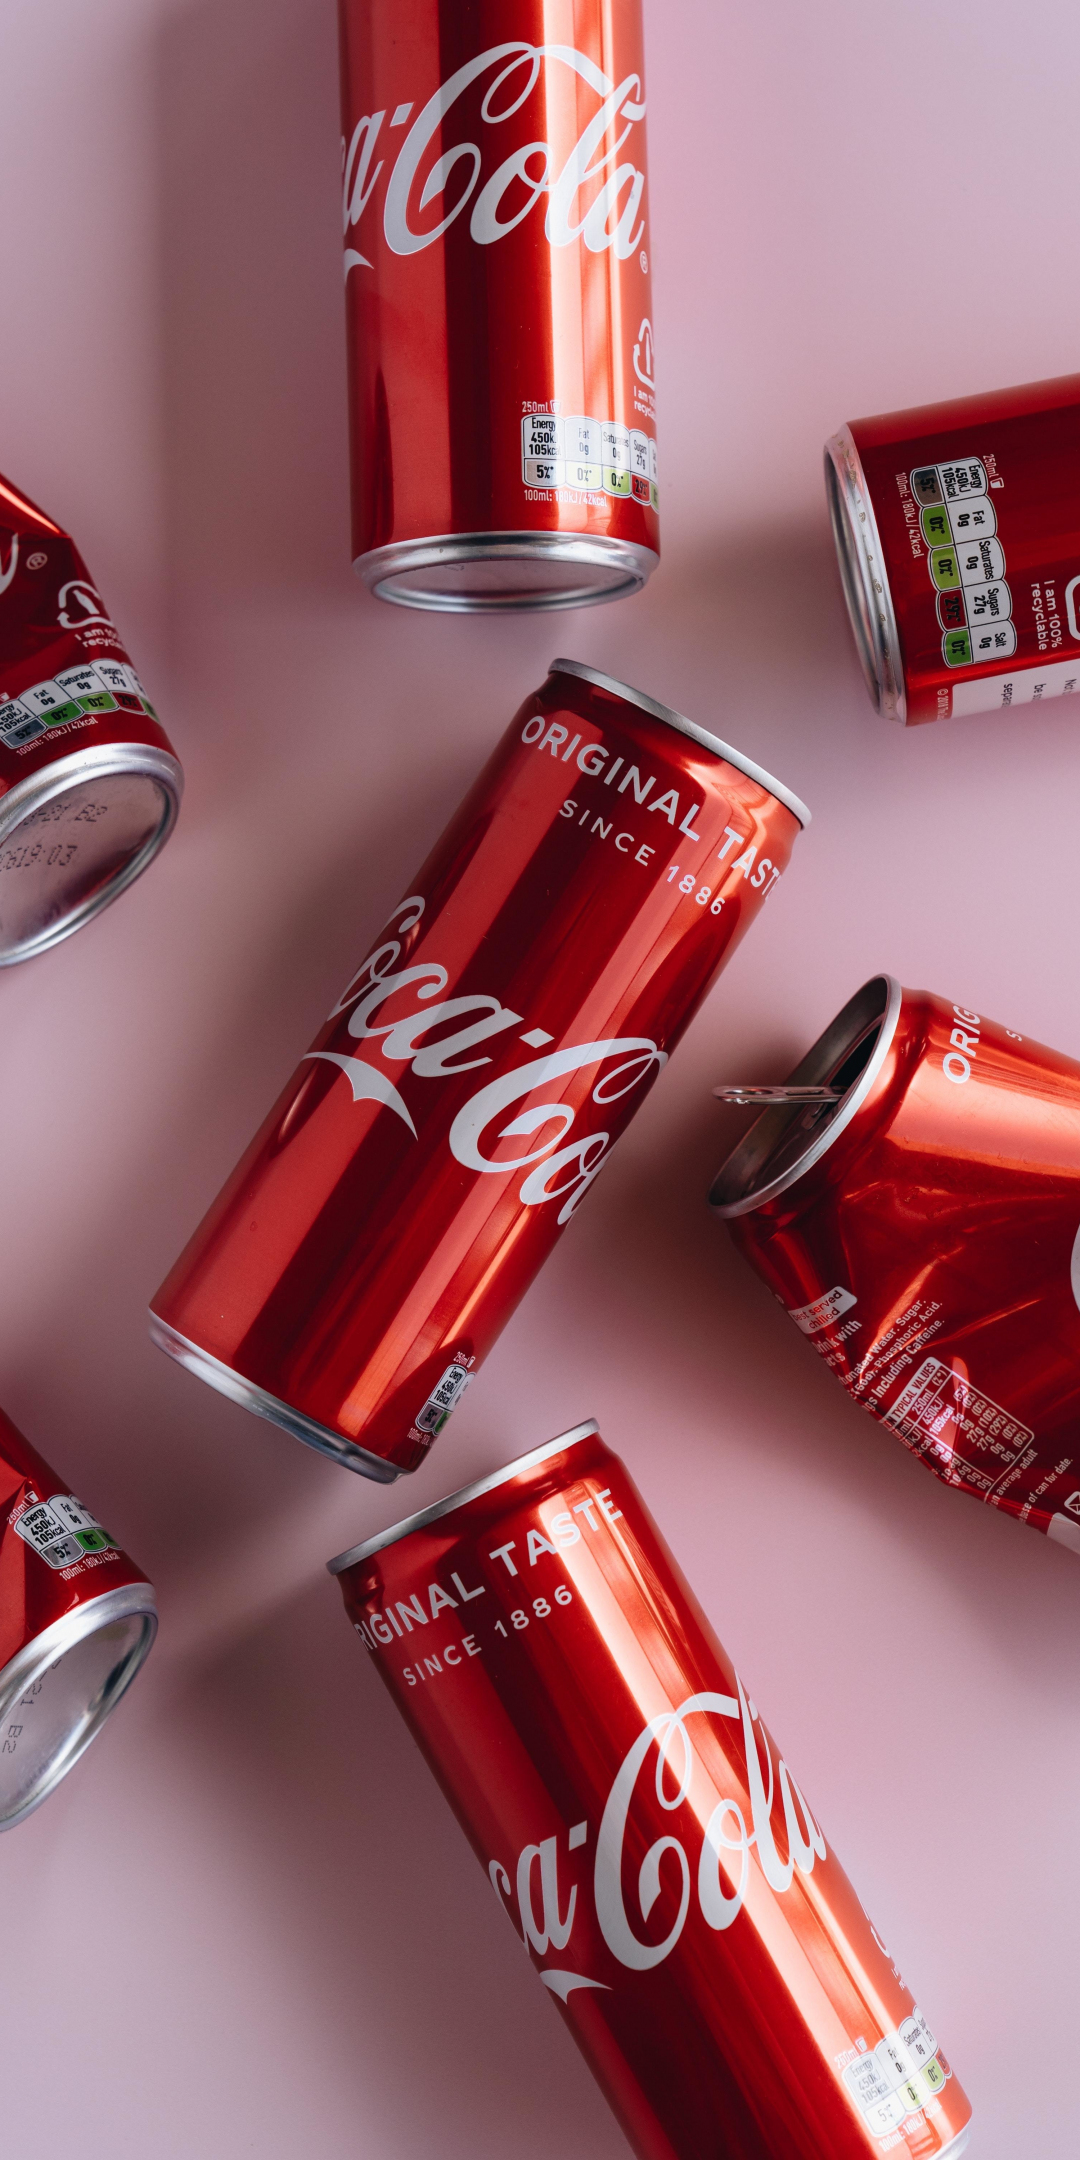 Soft-drink, coca cola, drink can, 1080x2160 wallpaper